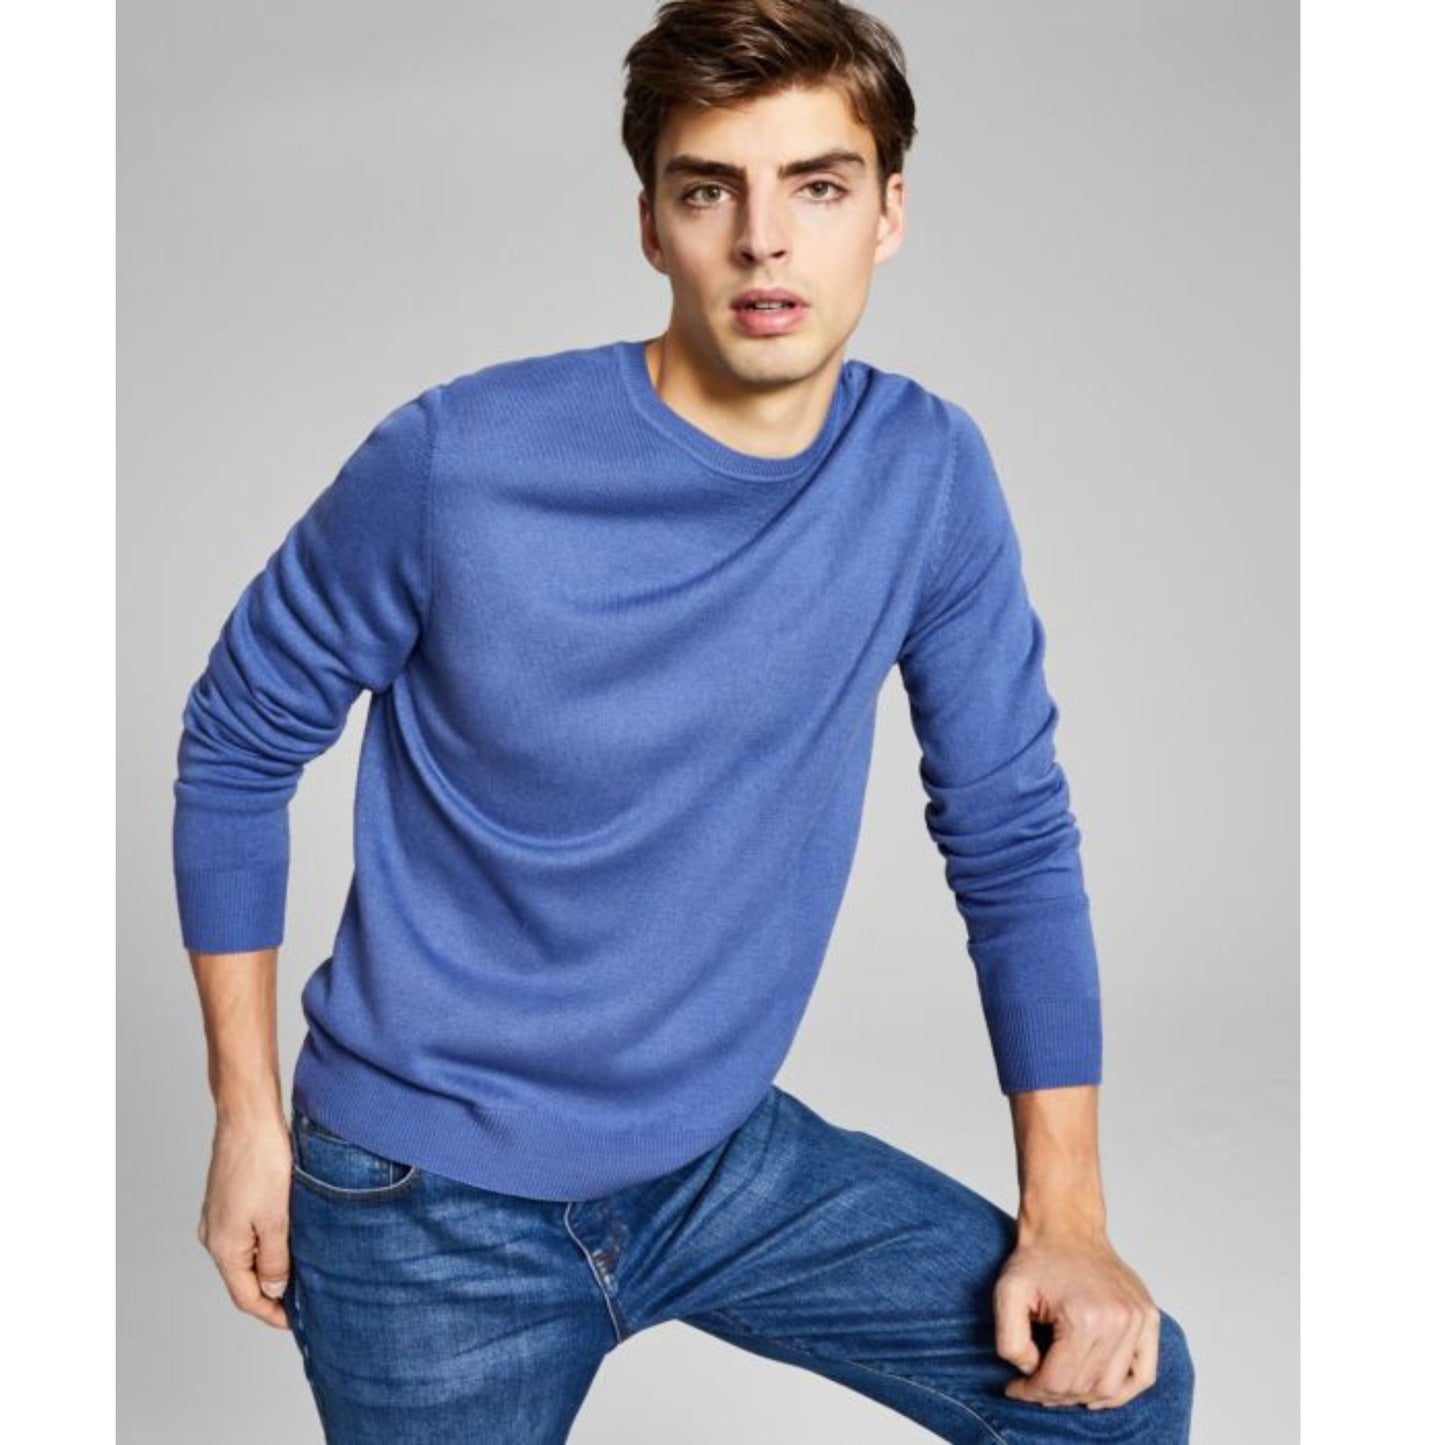 And Now This-And Now This Mens Solid Sweater , Blue, - Brandat Outlet